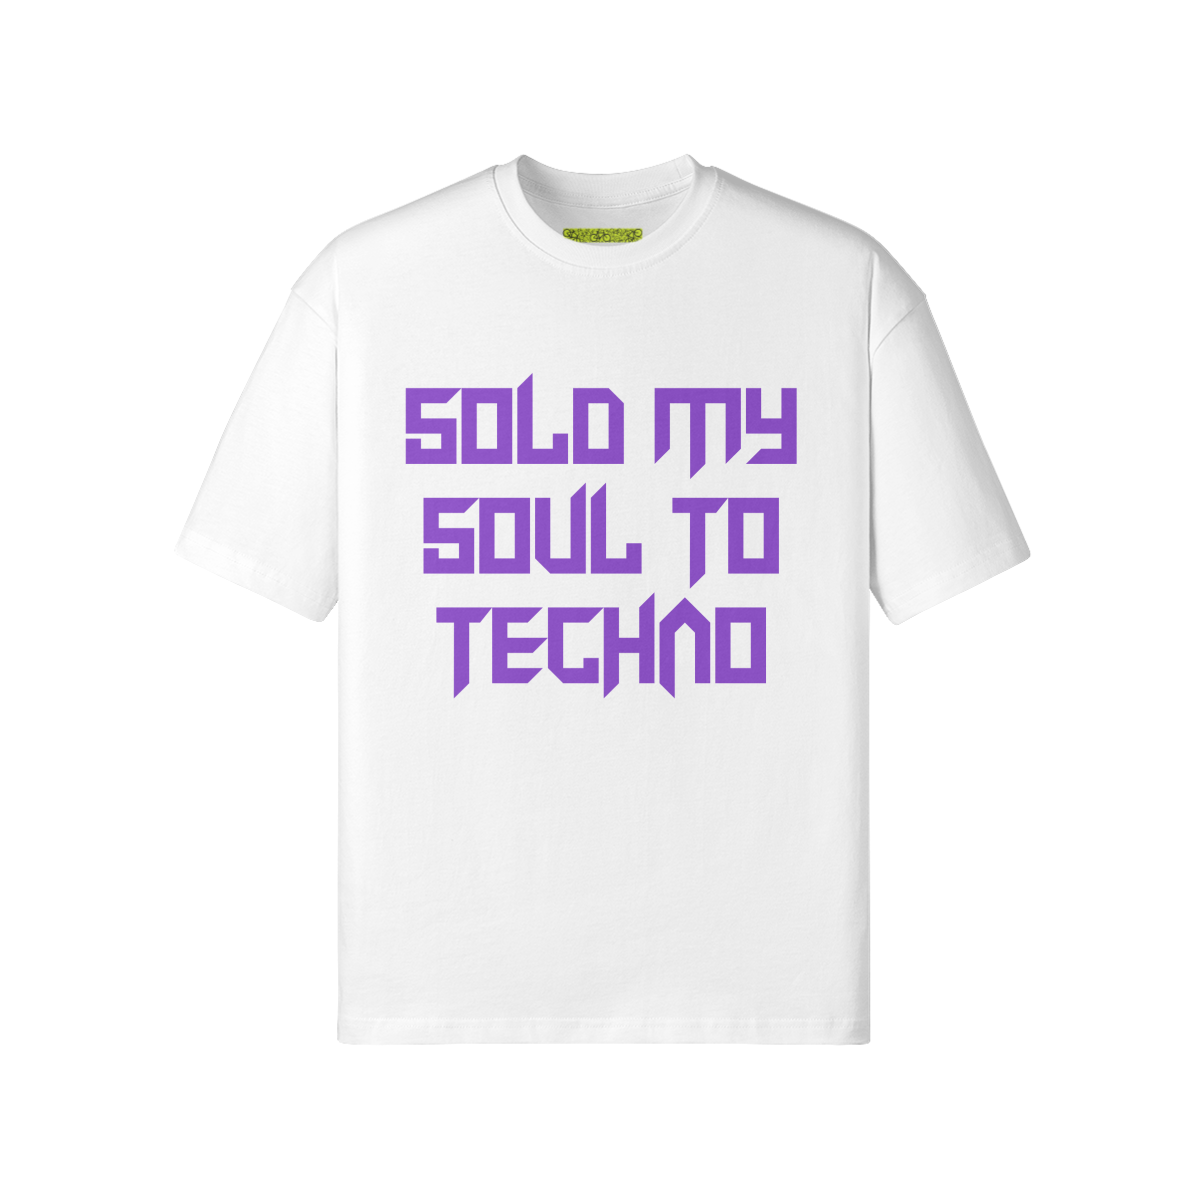 SOLD MY SOUL TO TECHNO - Unisex Loose T-shirt